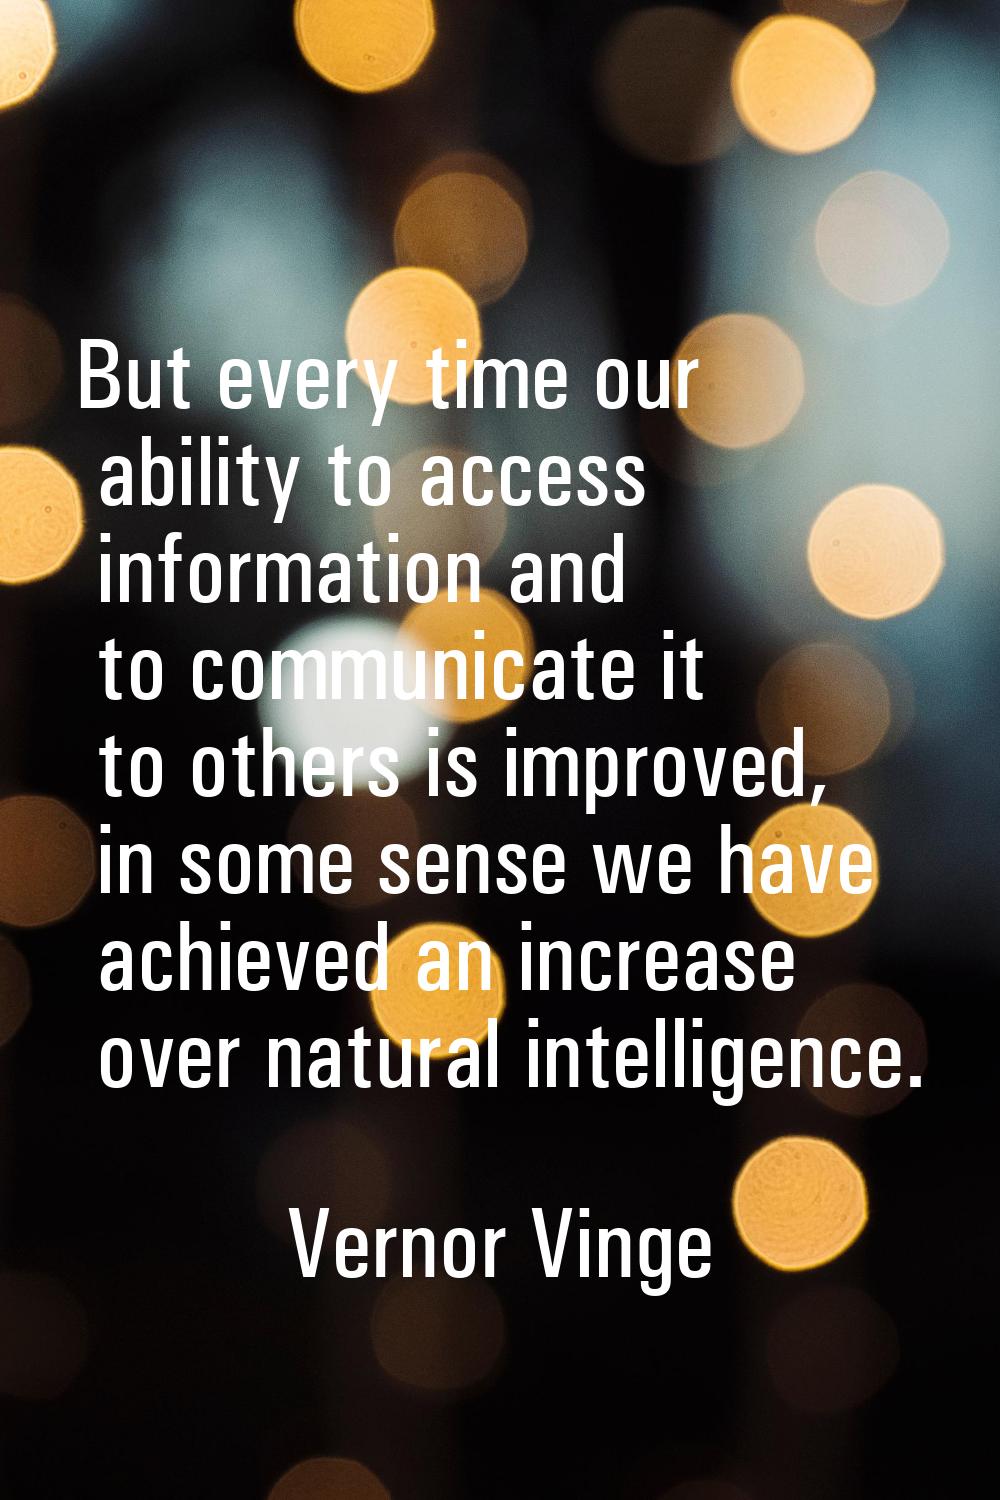 But every time our ability to access information and to communicate it to others is improved, in so